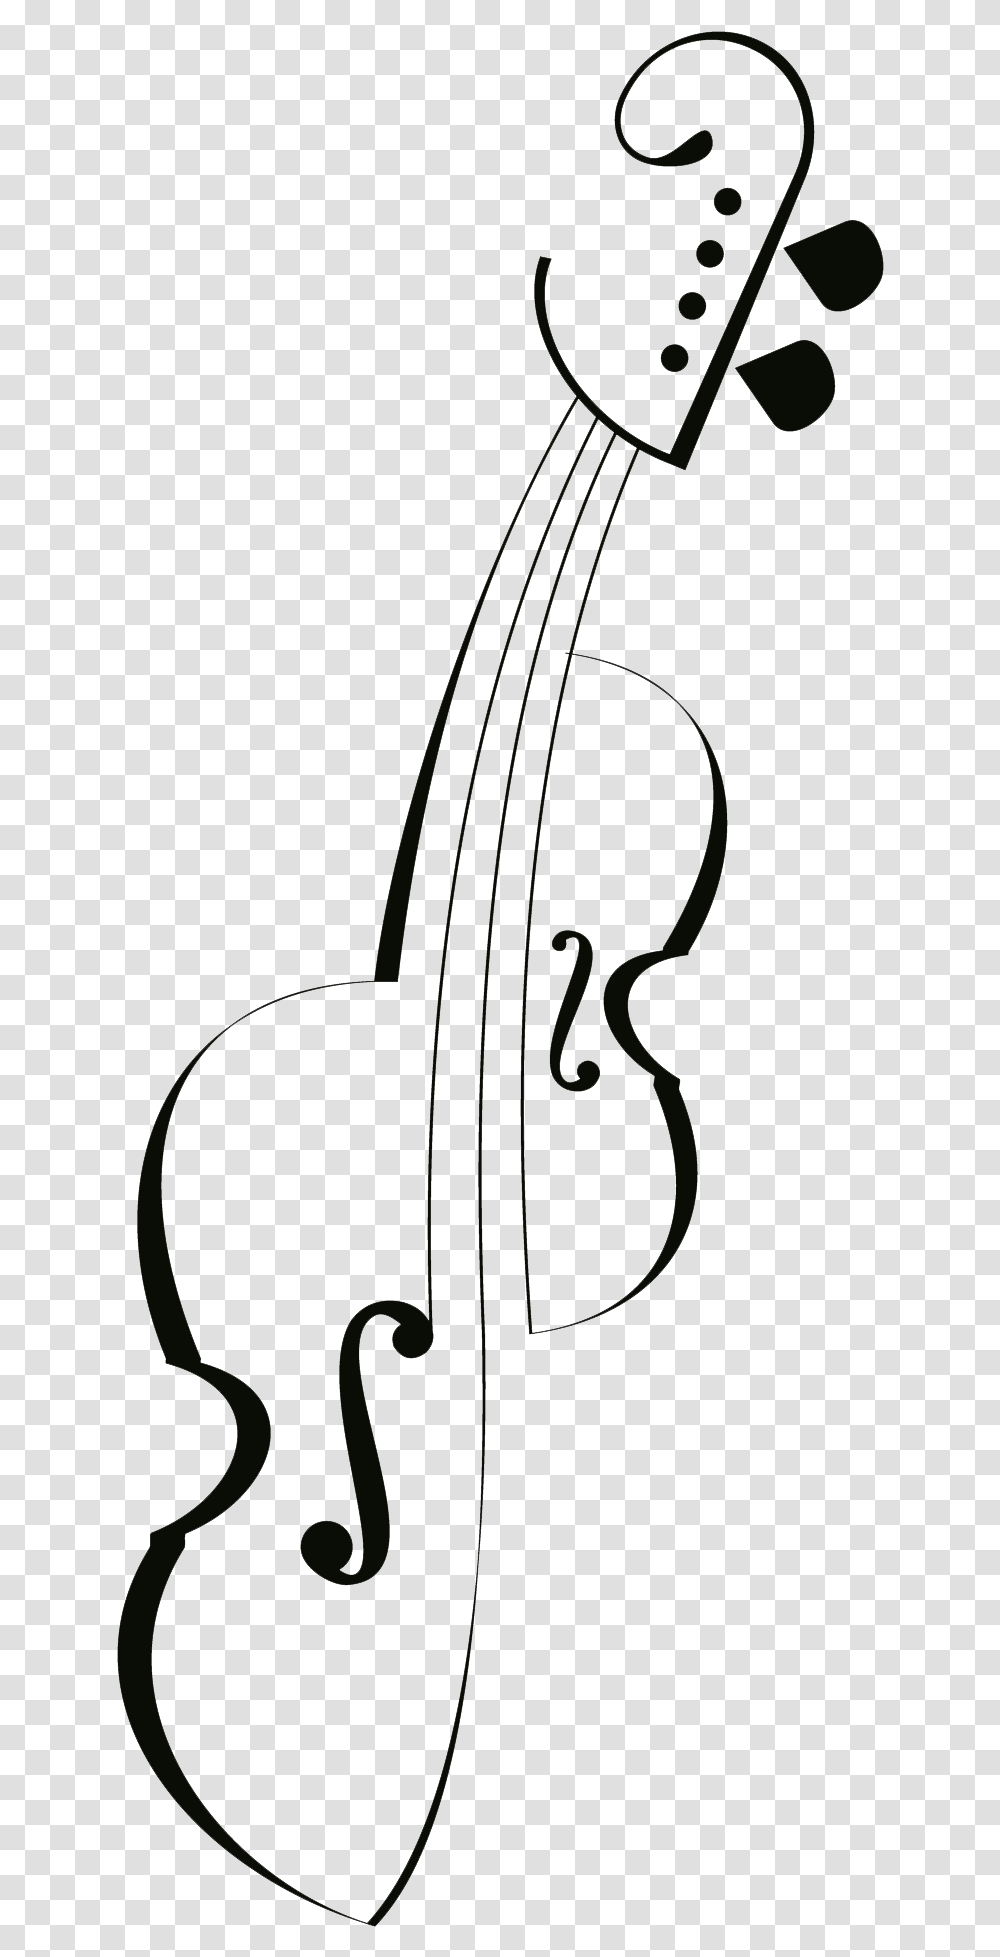 Violin Tattoo Designs Music Tattoo Images Hd, Leisure Activities, Musical Instrument, Bow, Cello Transparent Png